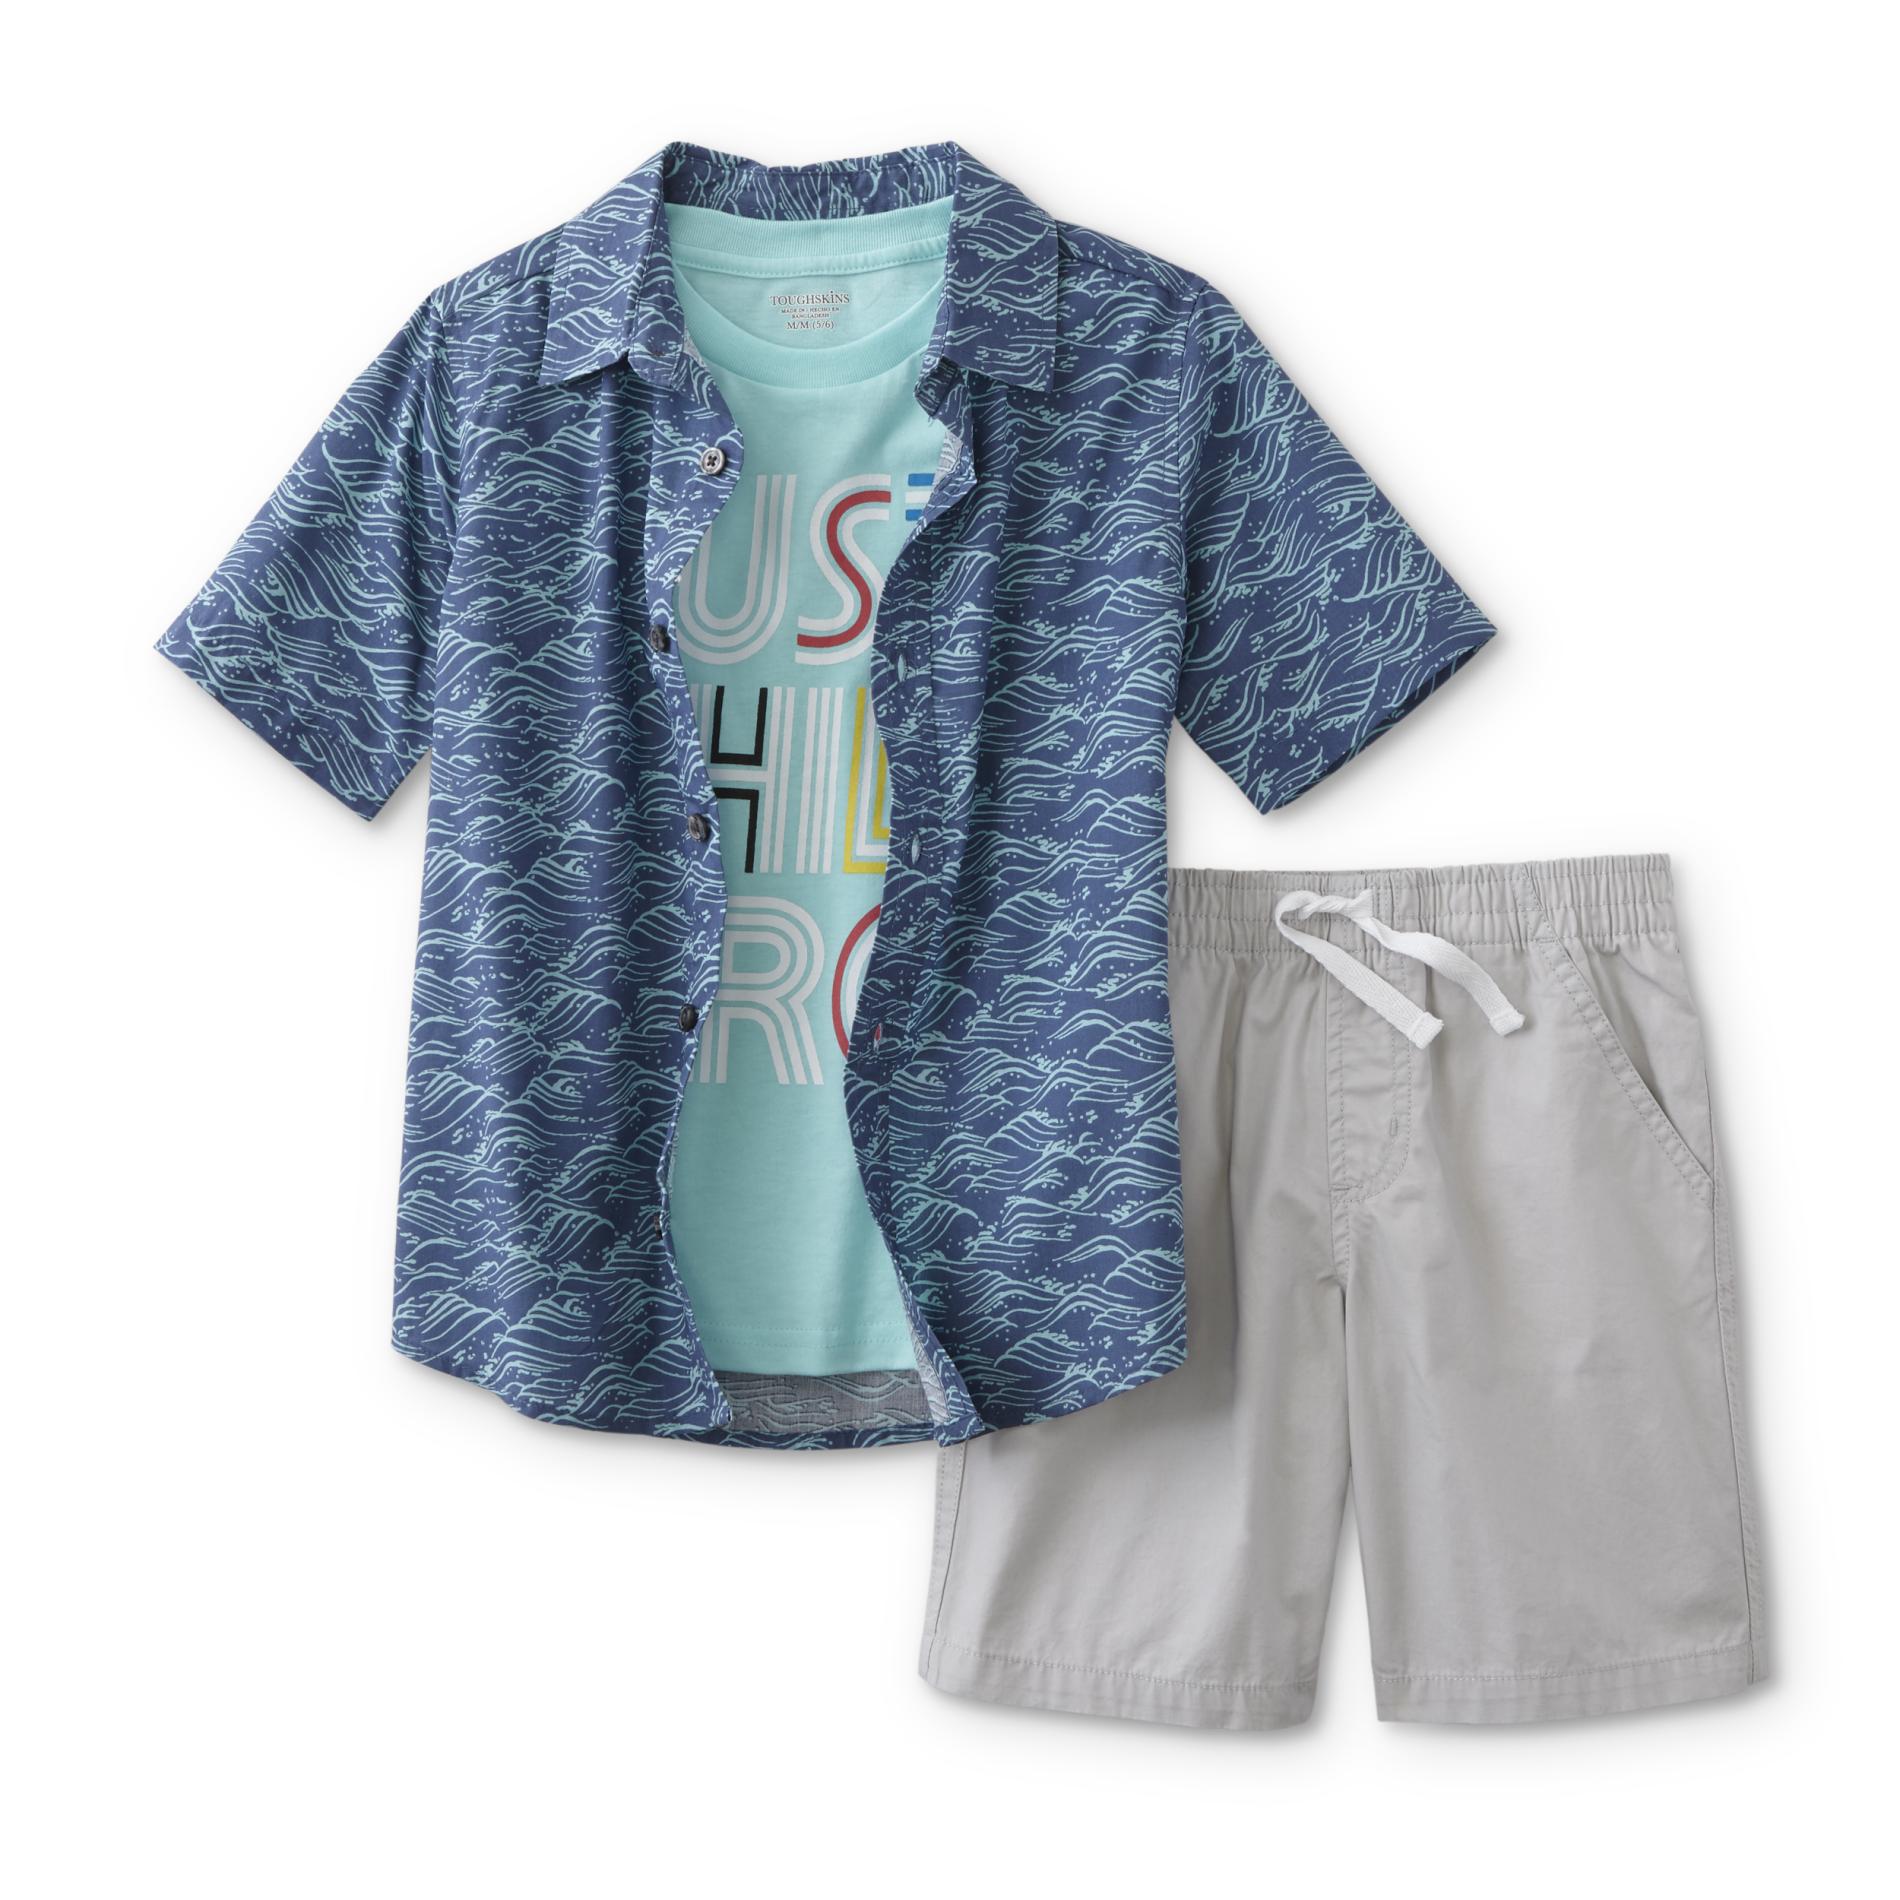 Toughskins Infant & Toddler Boys' Graphic T-Shirt, Collared Shirt & Shorts - Waves & Chill